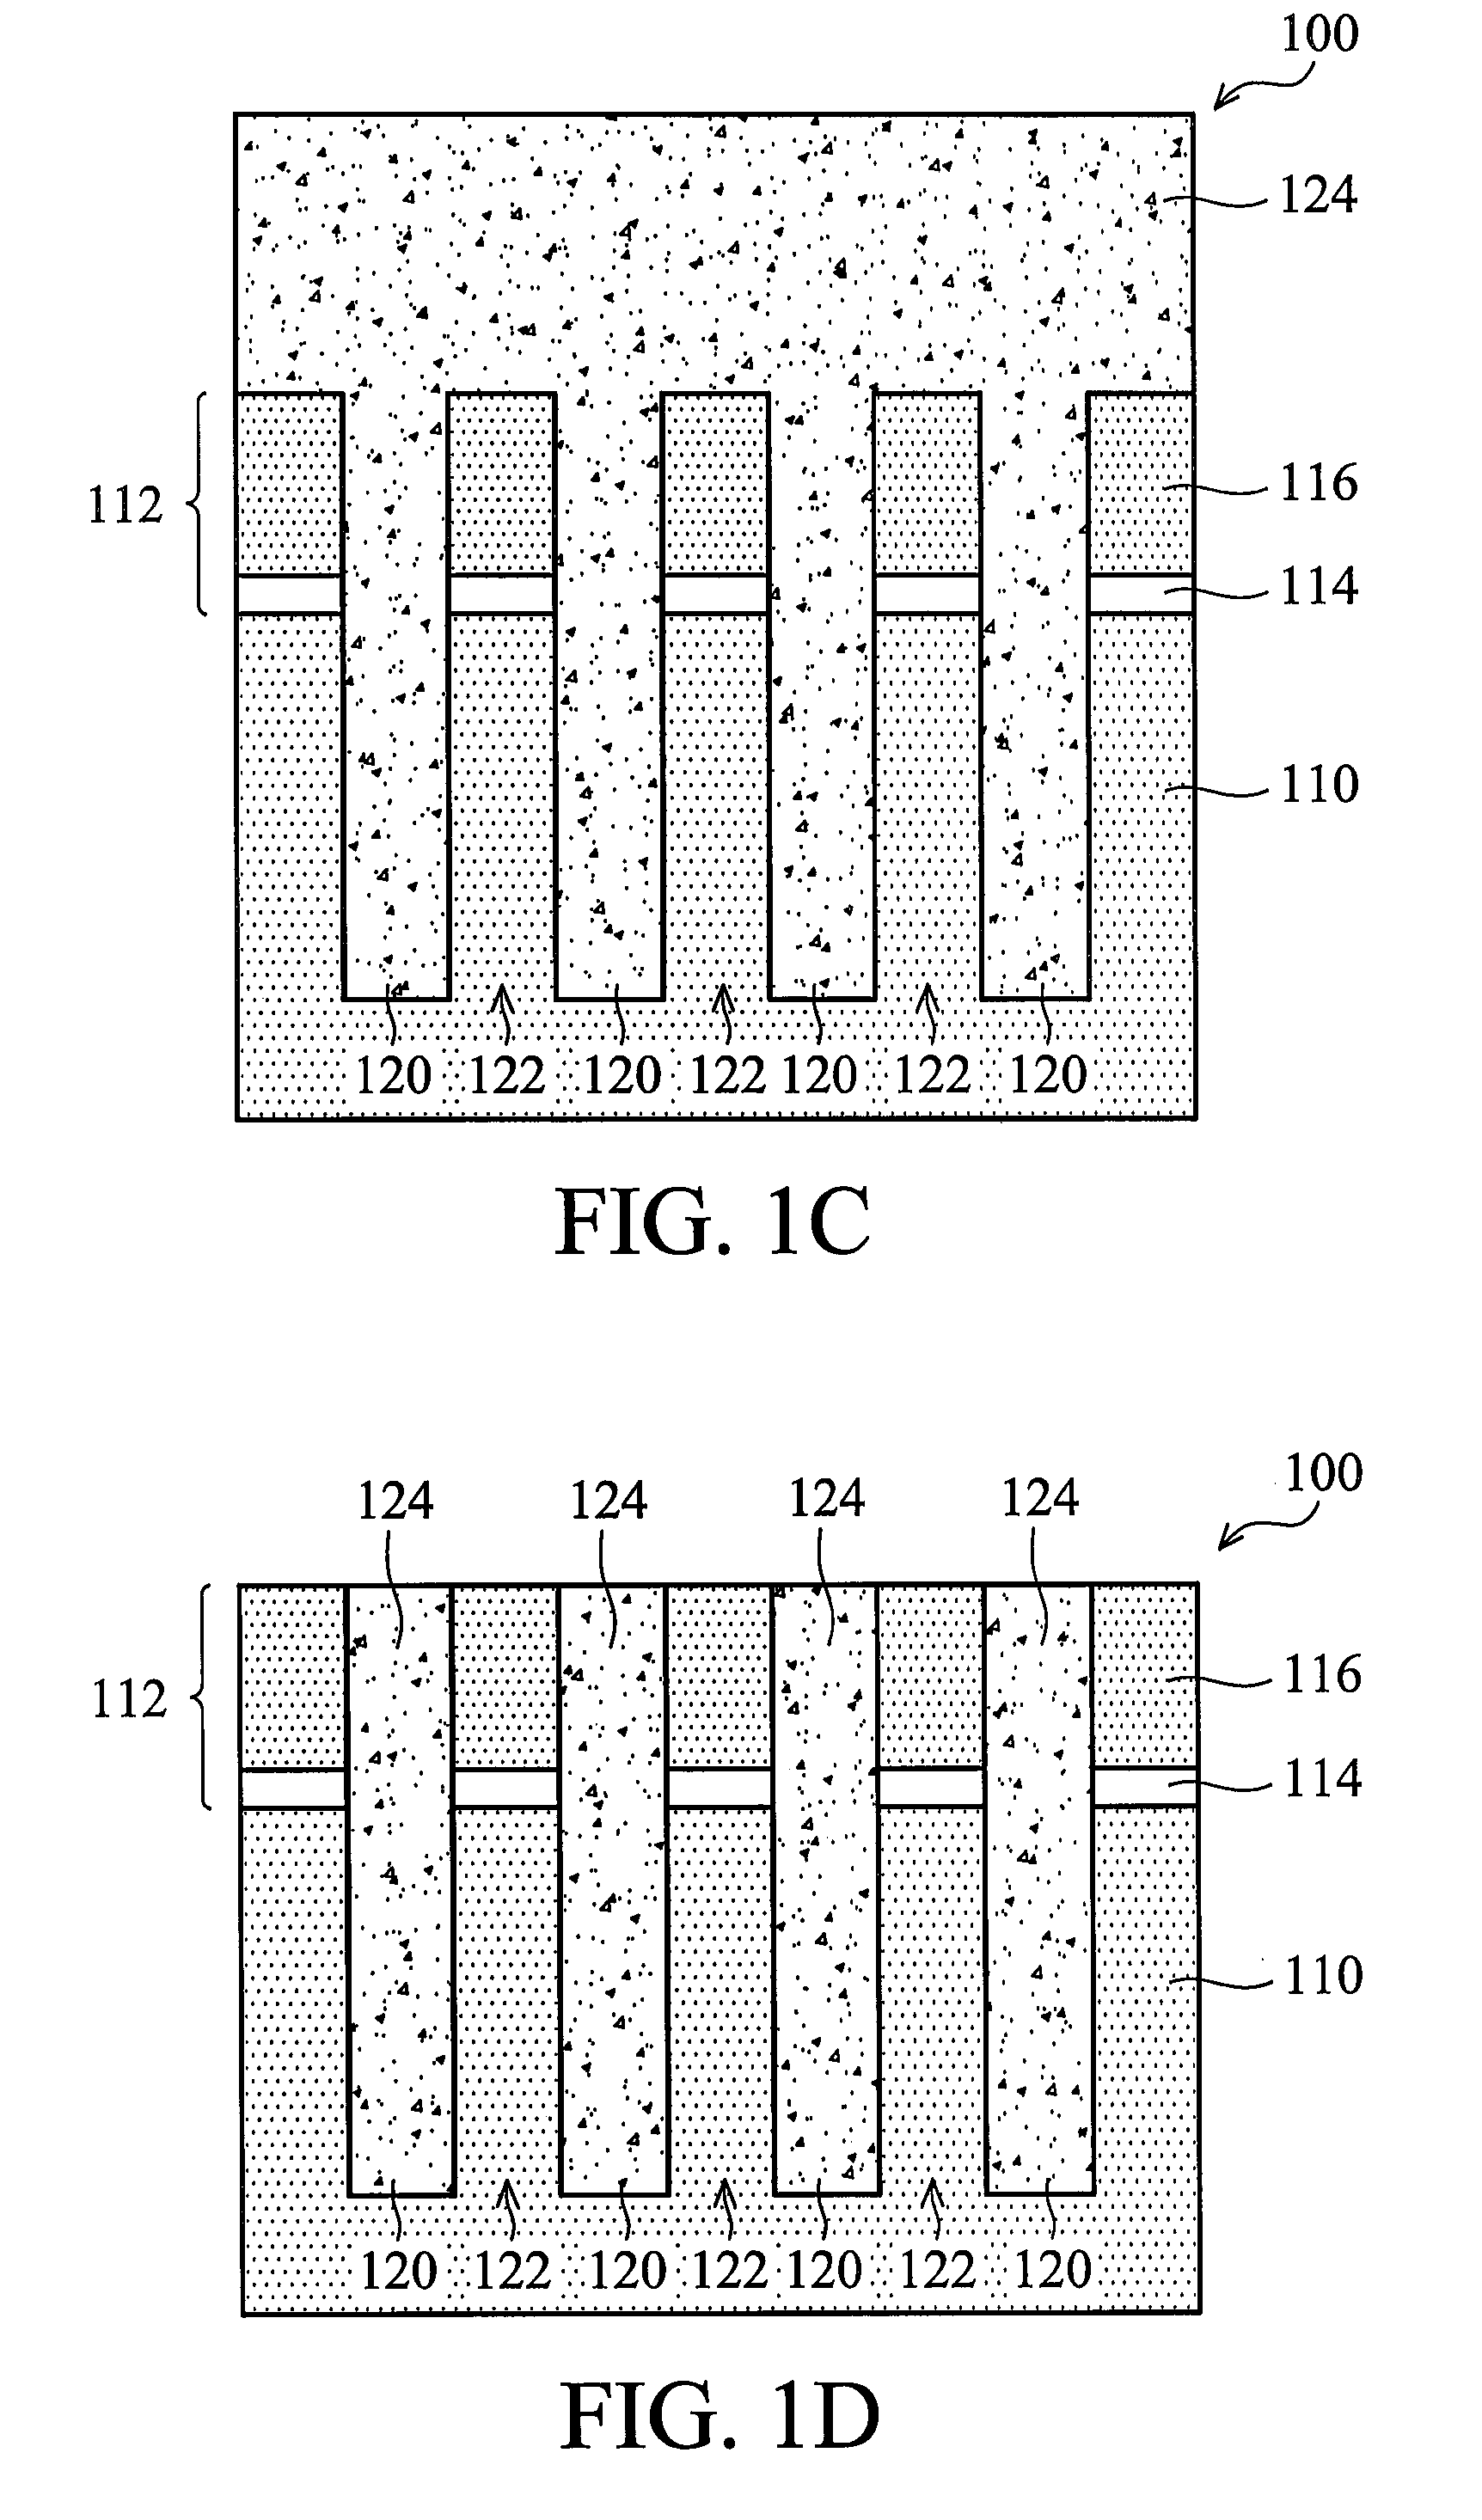 Semiconductor device having multiple fin heights